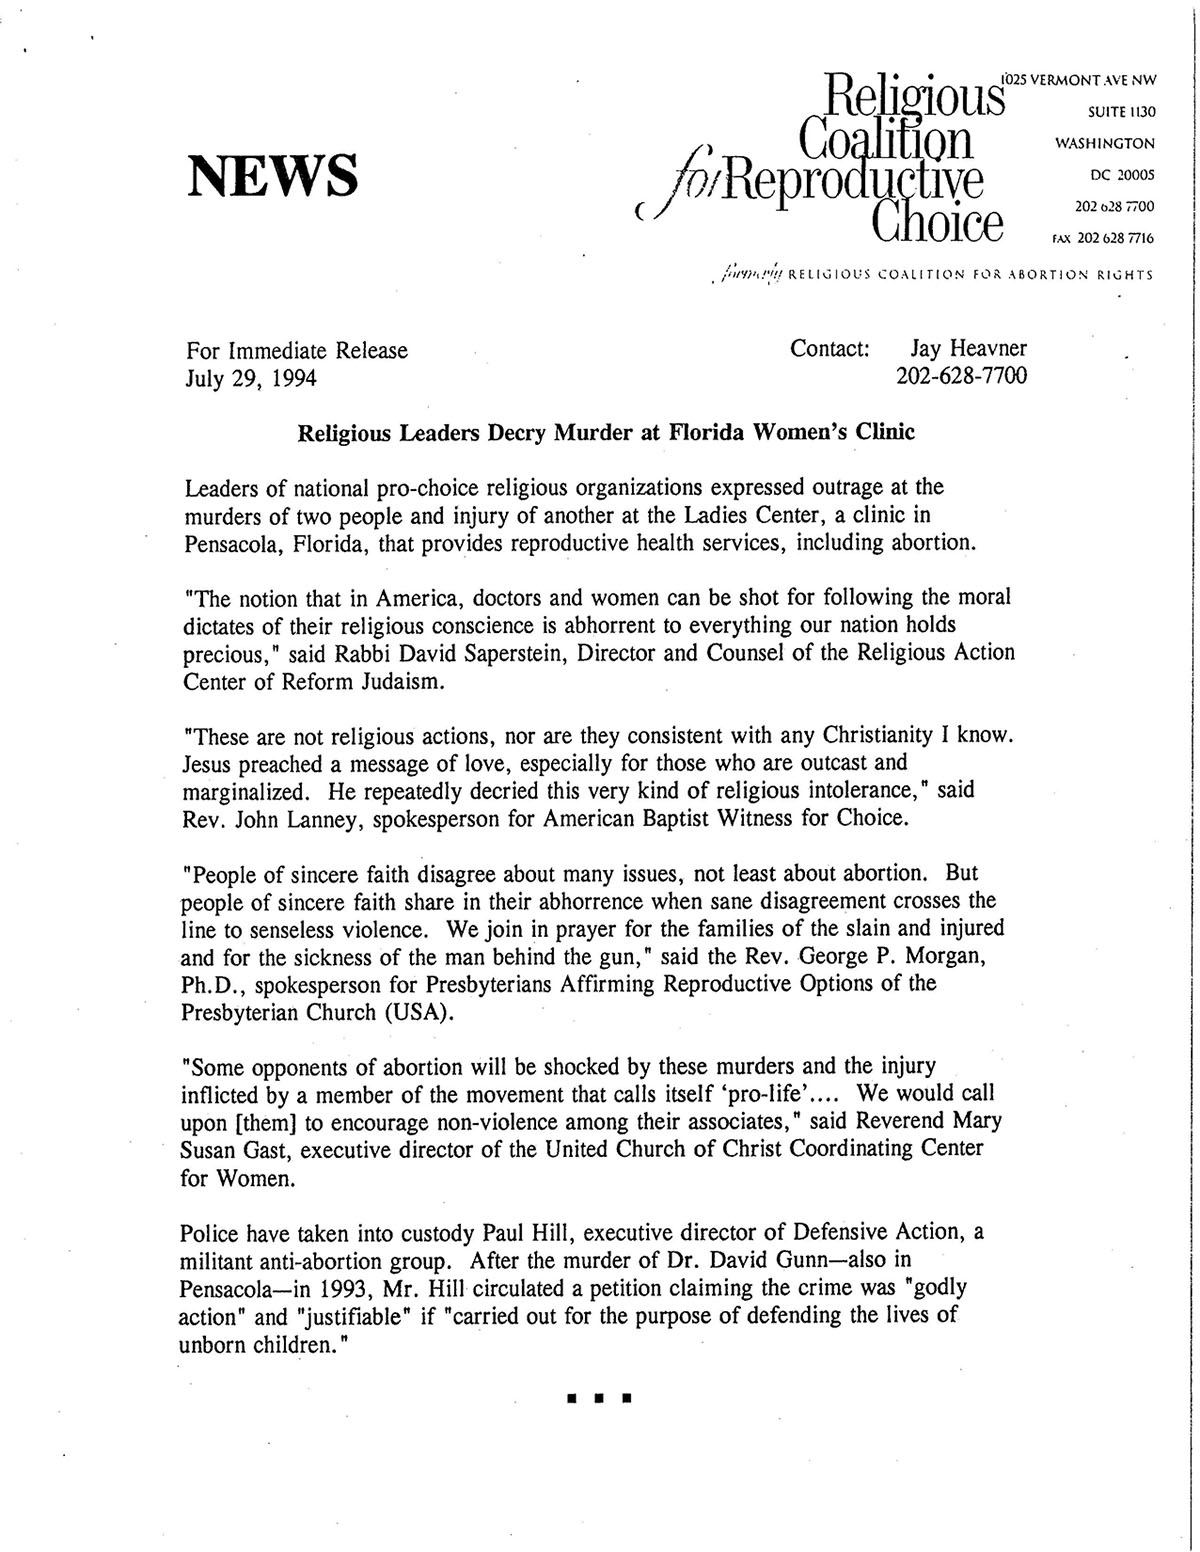 Release from Religious Coalition for Reproductive Choice, 1994. PHS RG 519, box 70, folder 11.